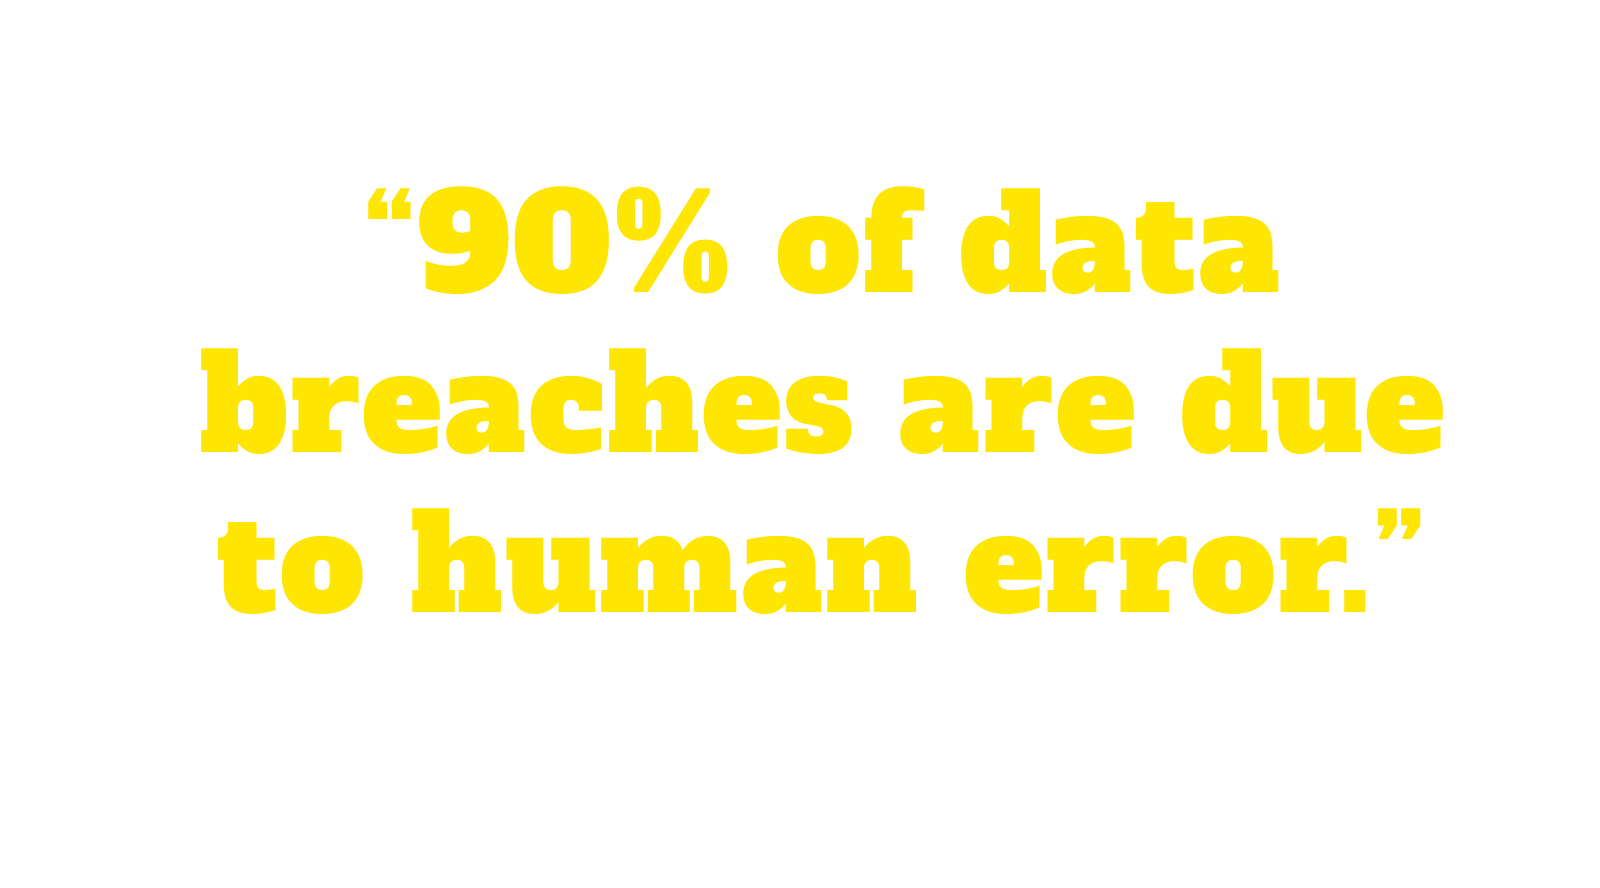 90% of data breaches are due to human error